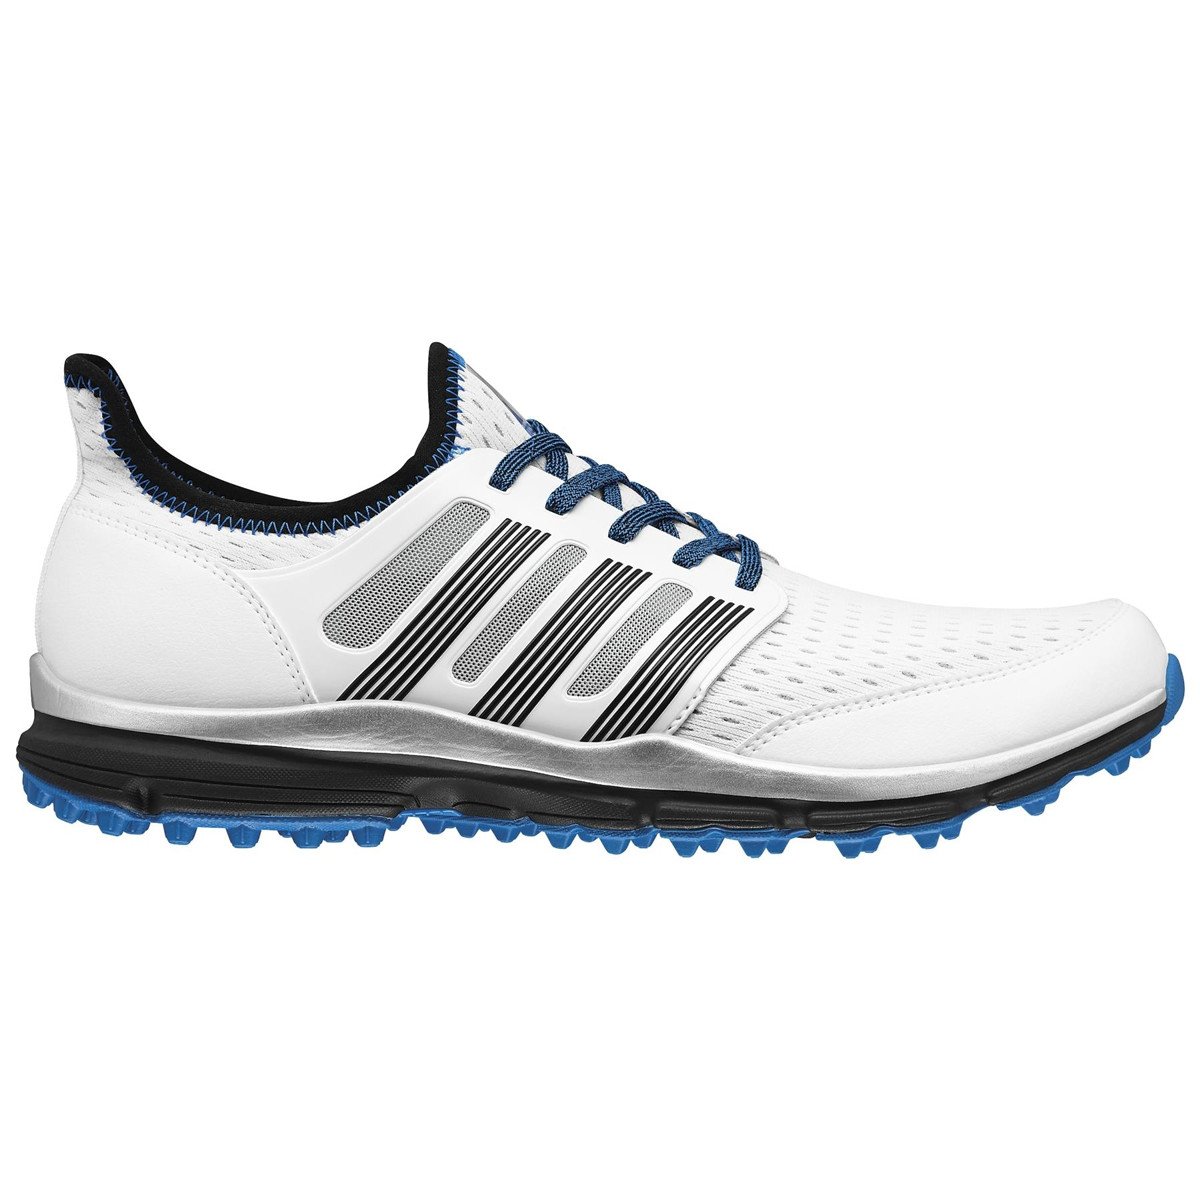 Adidas Climacool Golf Shoes - Discount Golf Shoes - Hurricane Golf